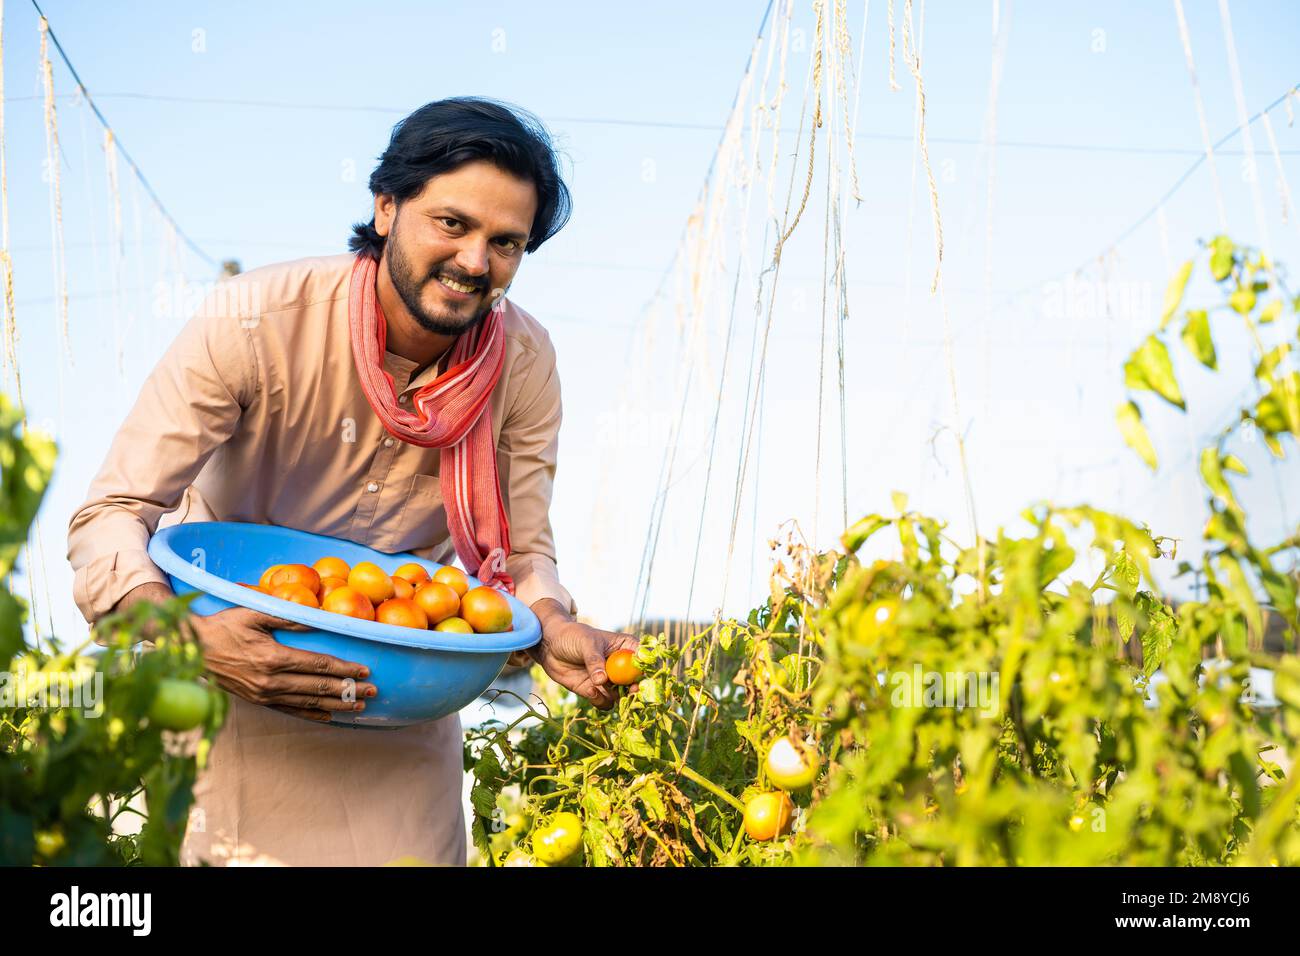 Happy indian farmer plucking tomatoes at horticulture or farmland - concept of village farming lifestyle, small agri business and organic produce Stock Photo